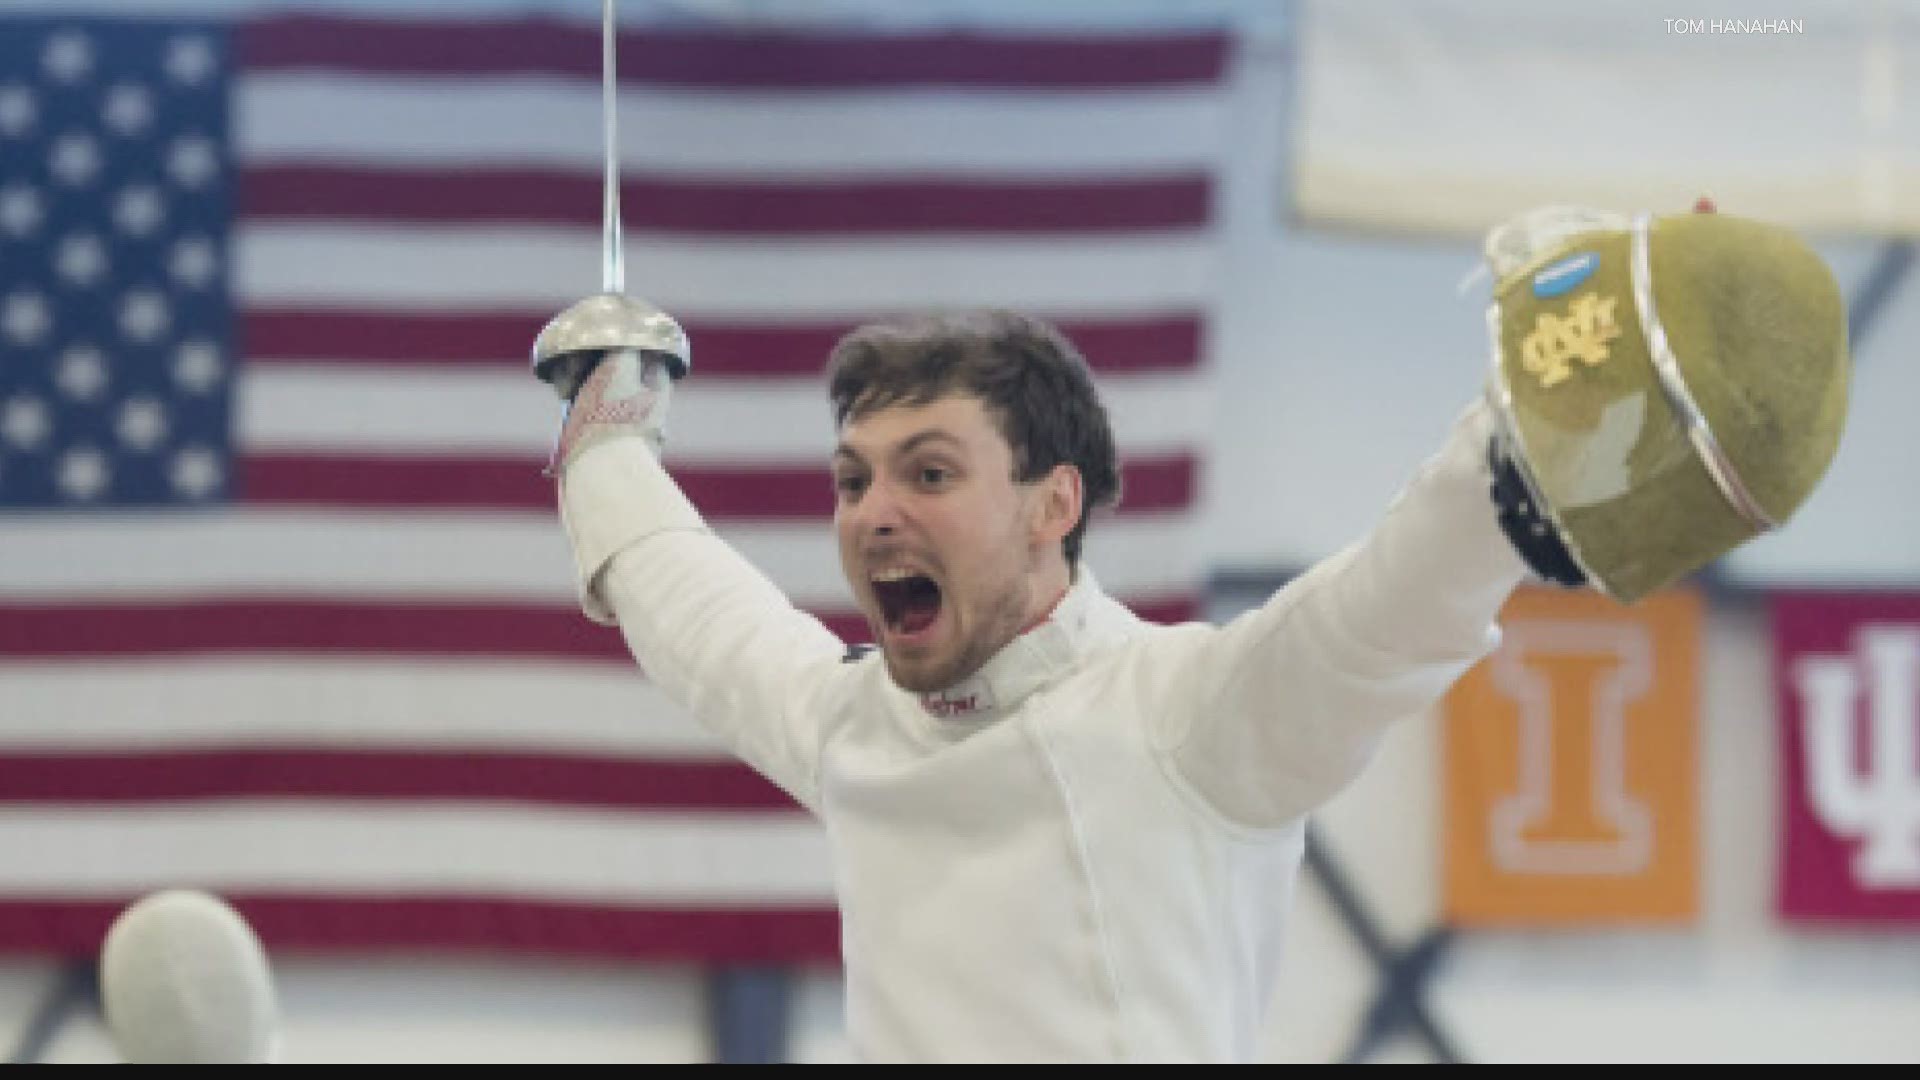 The non-profit fencing club has been around for more than 40 years and helps teach athletes the skills and techniques to compete.